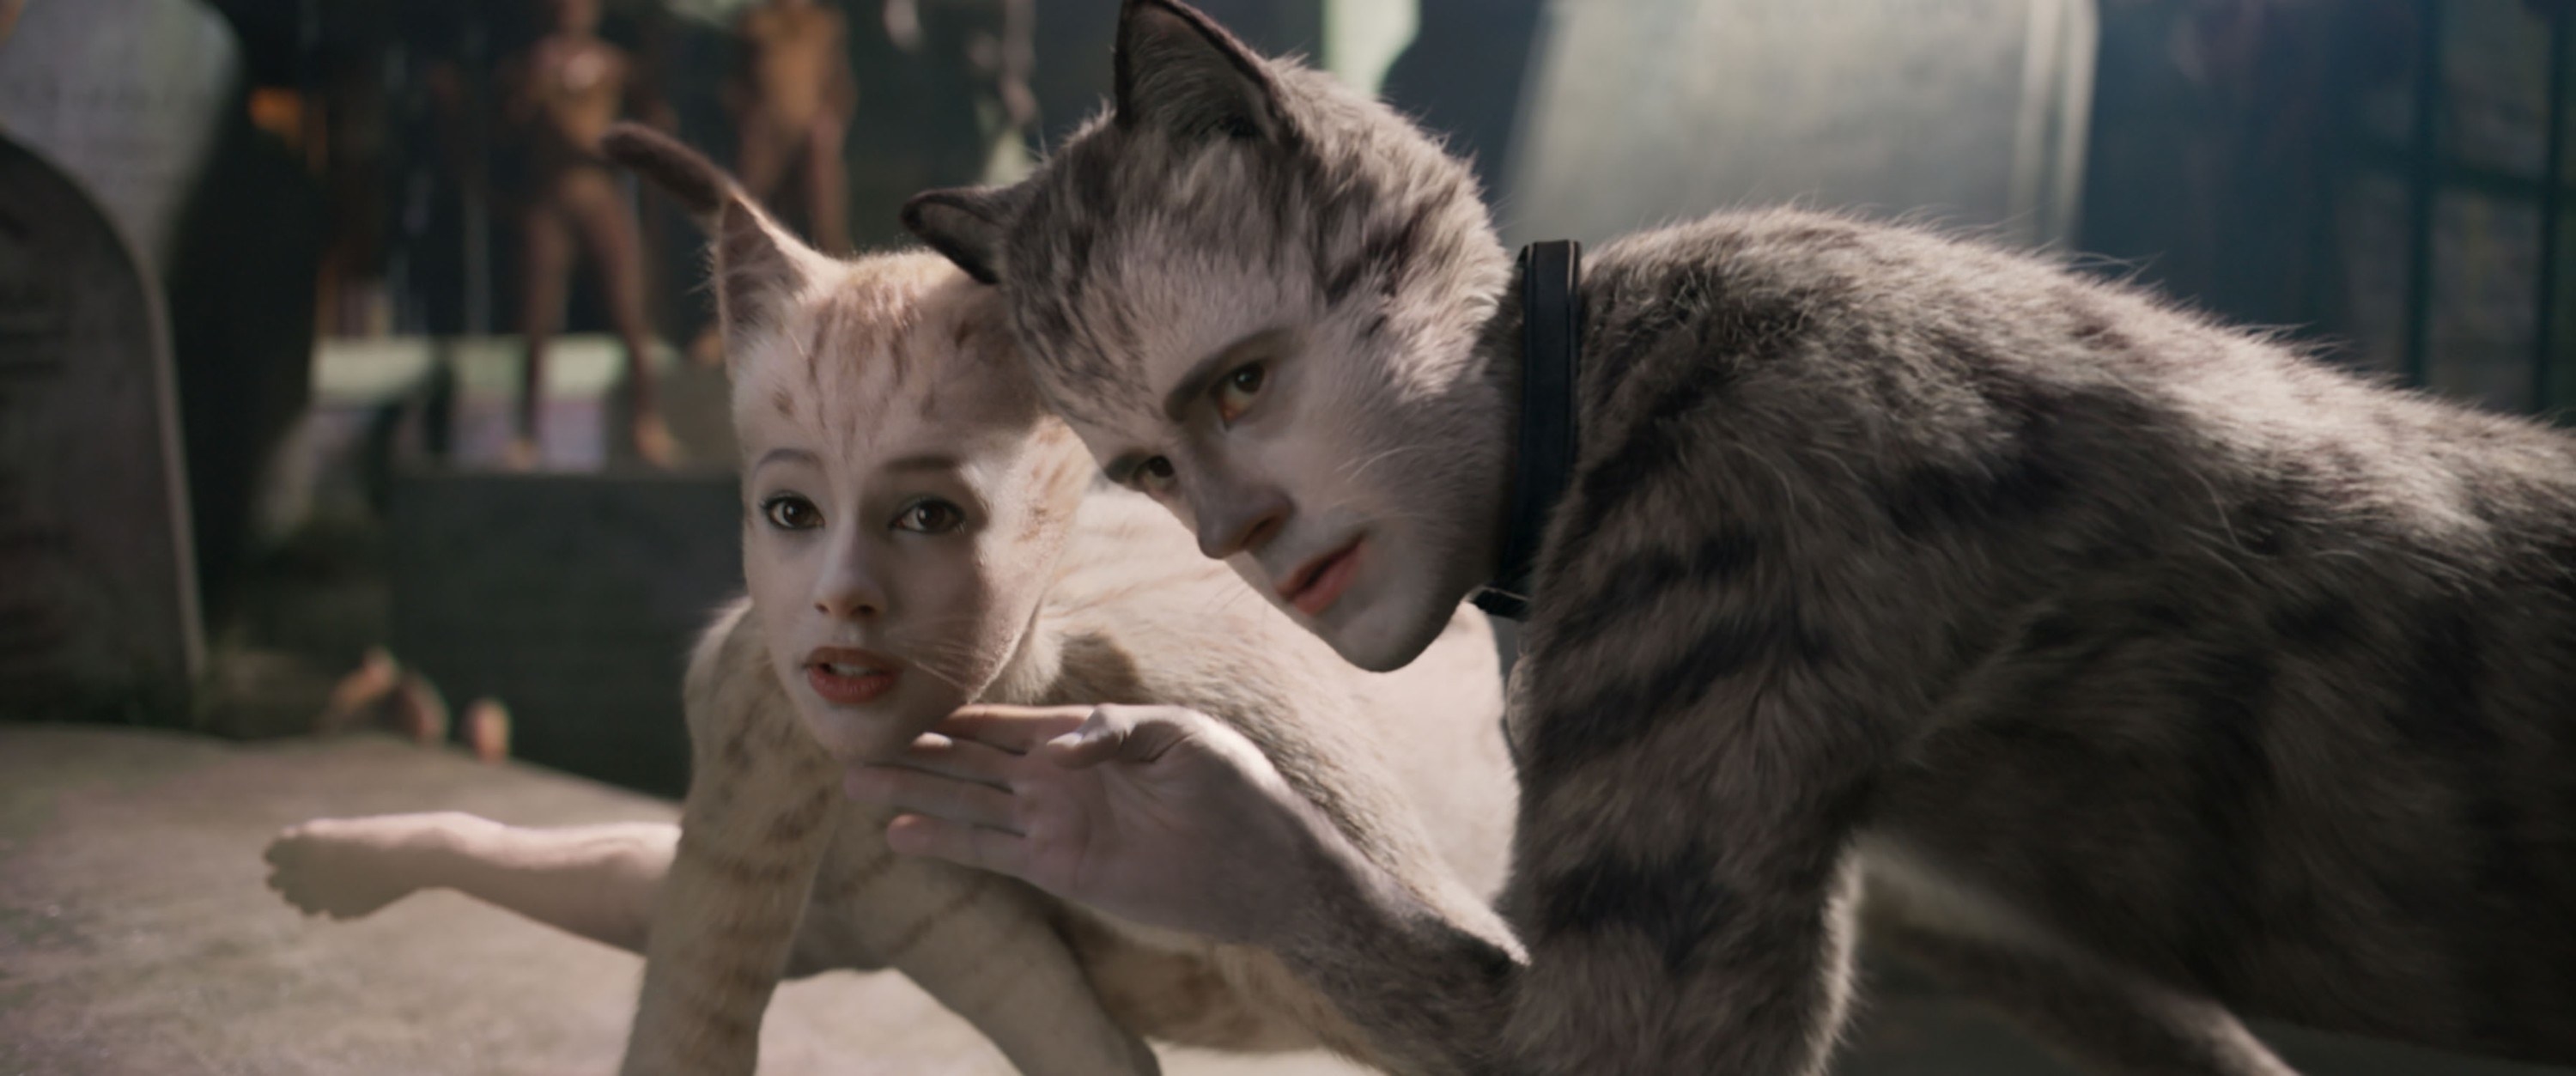 two of the Cats in the film